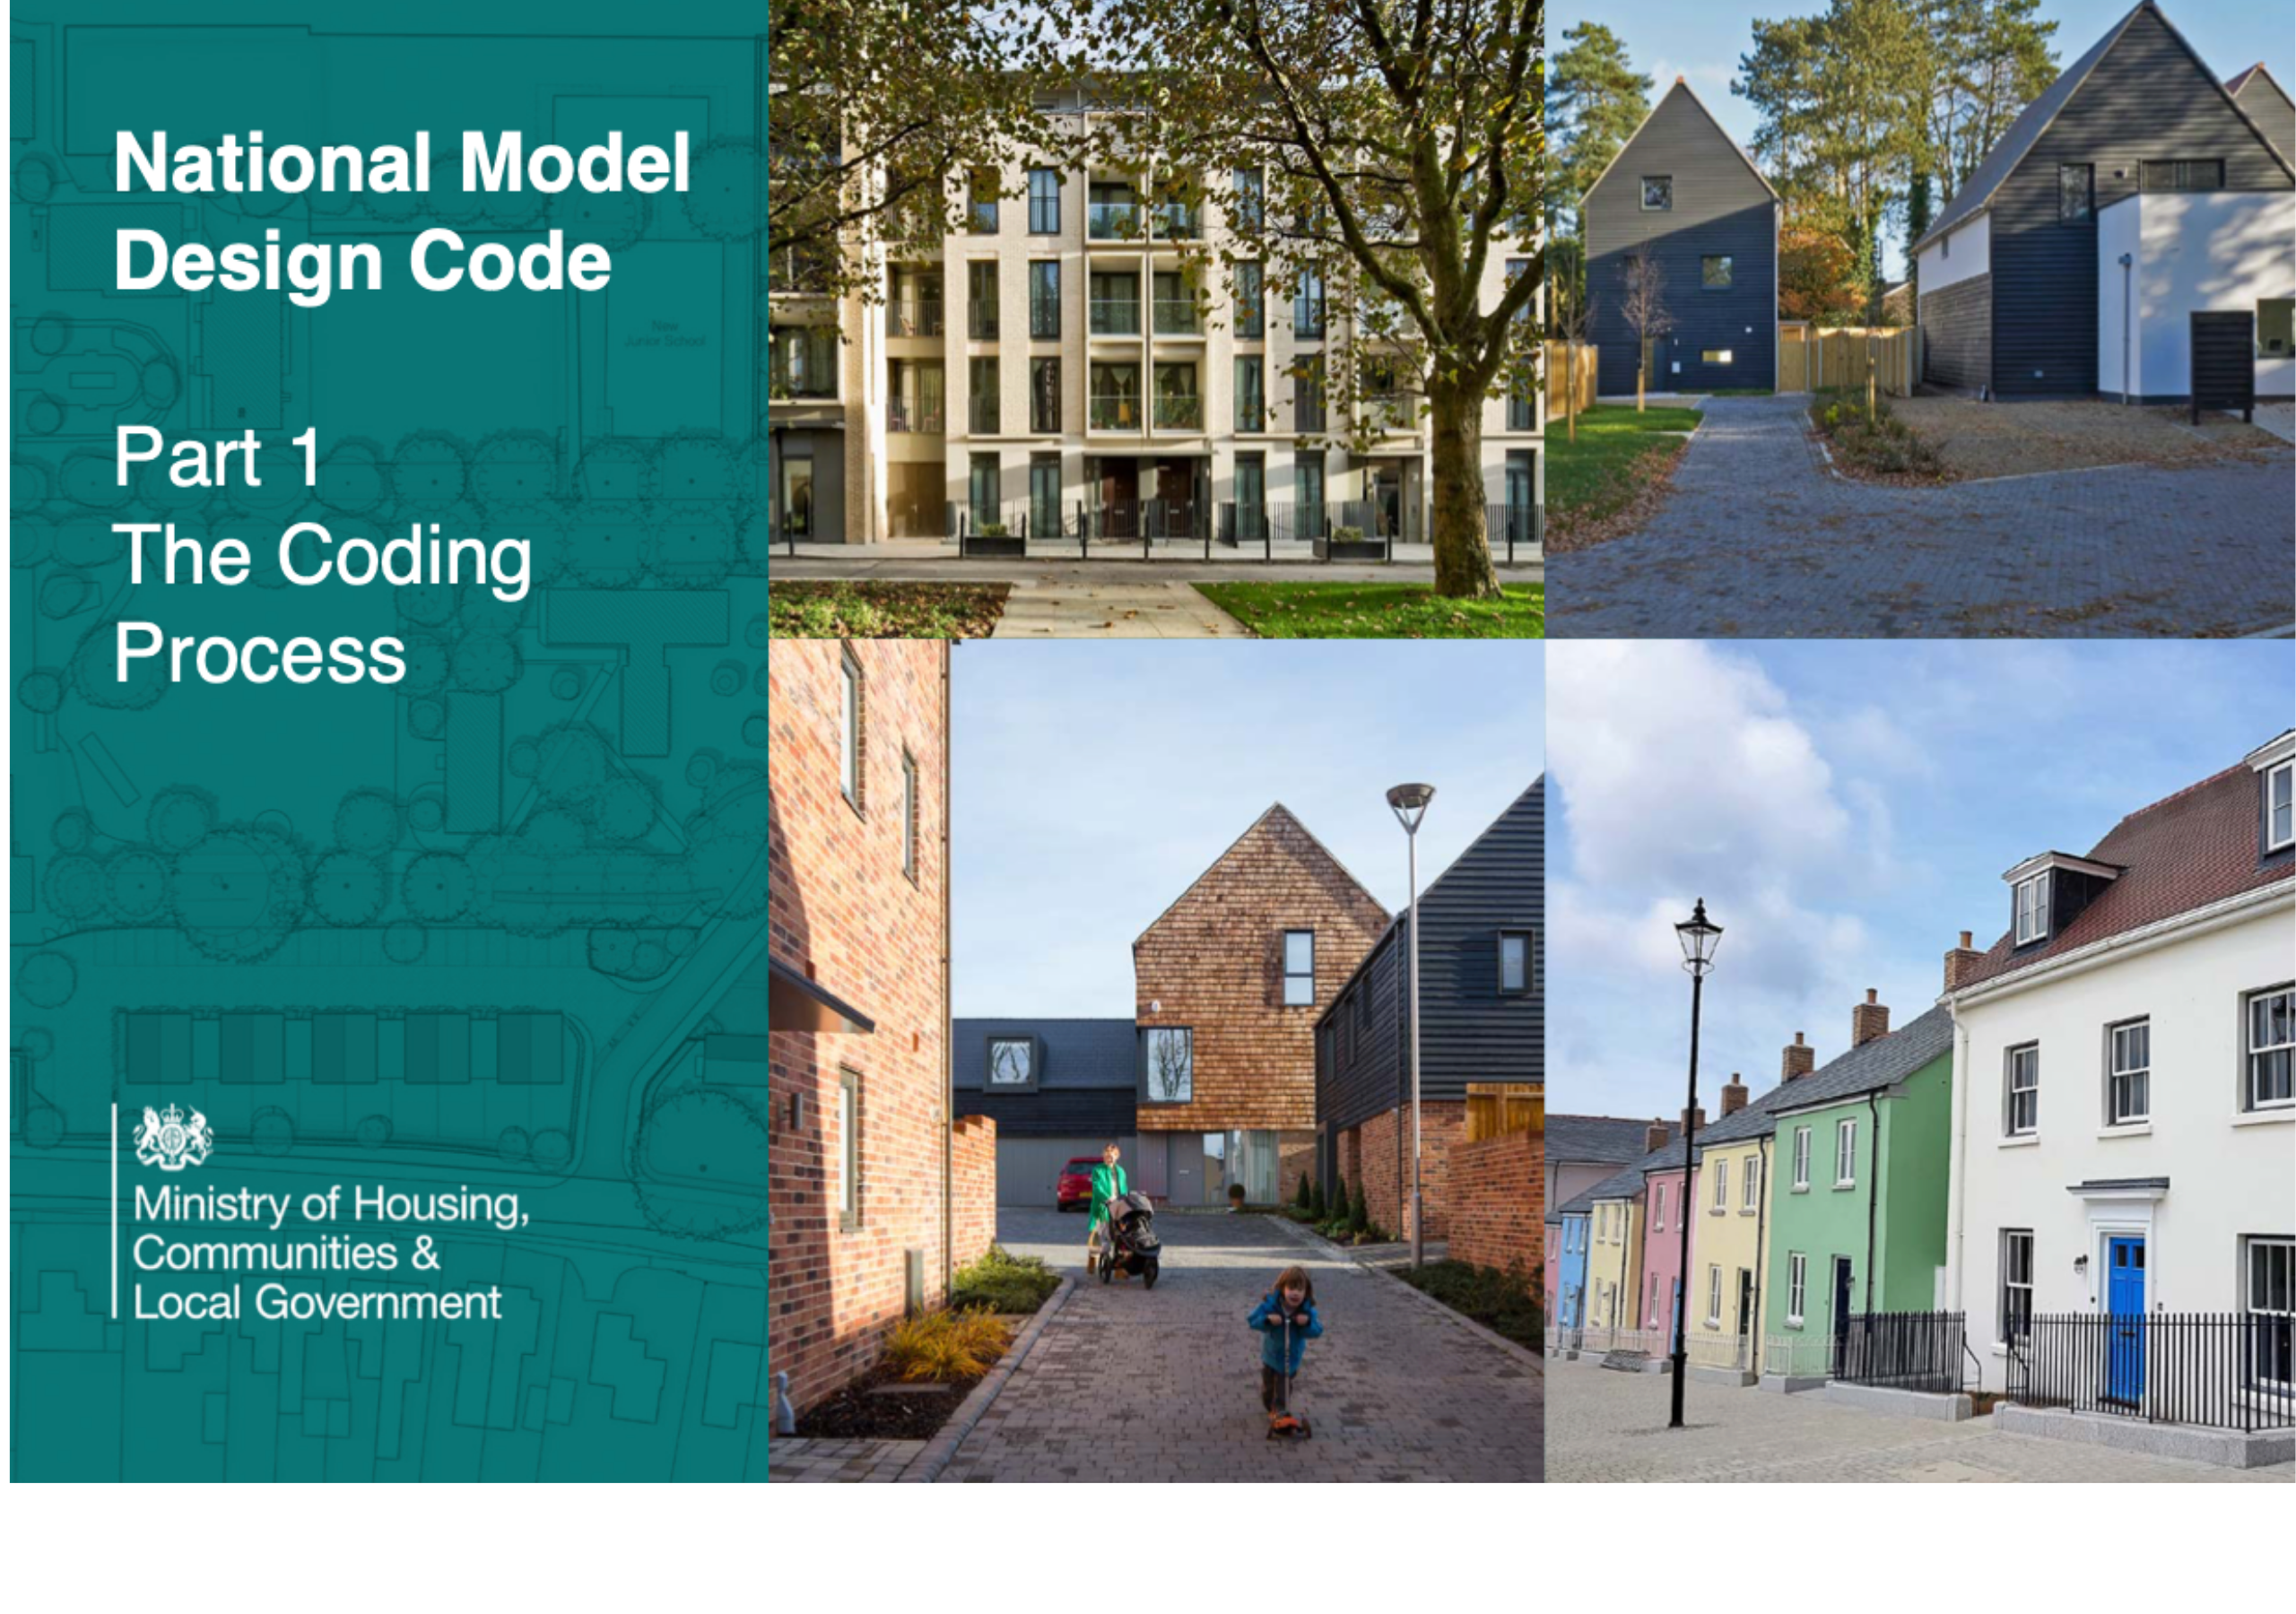 Design South East – Lunch & Learn Briefing – Lessons Learned from the National Model Design Code (NMDC) pilot